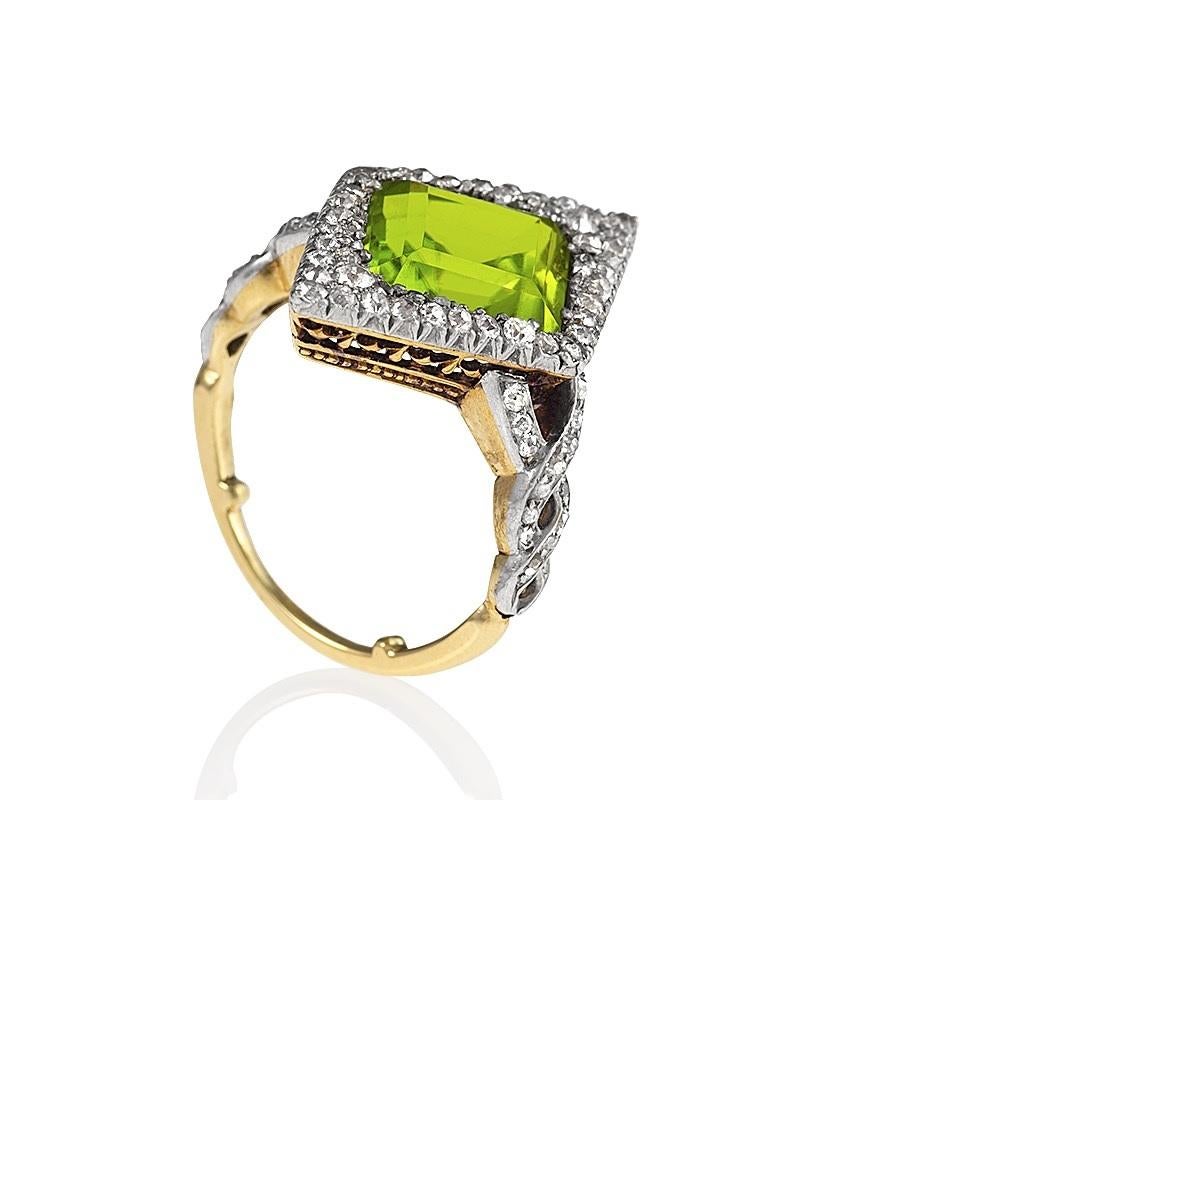 An Edwardian 18 karat gold and platinum ring with peridot and diamonds. This ring centers on a marquise-shape  peridot with an approximate weight of 4.15 carats, and 70 old European-cut diamonds with an approximate total weight of 1.00 carats. 